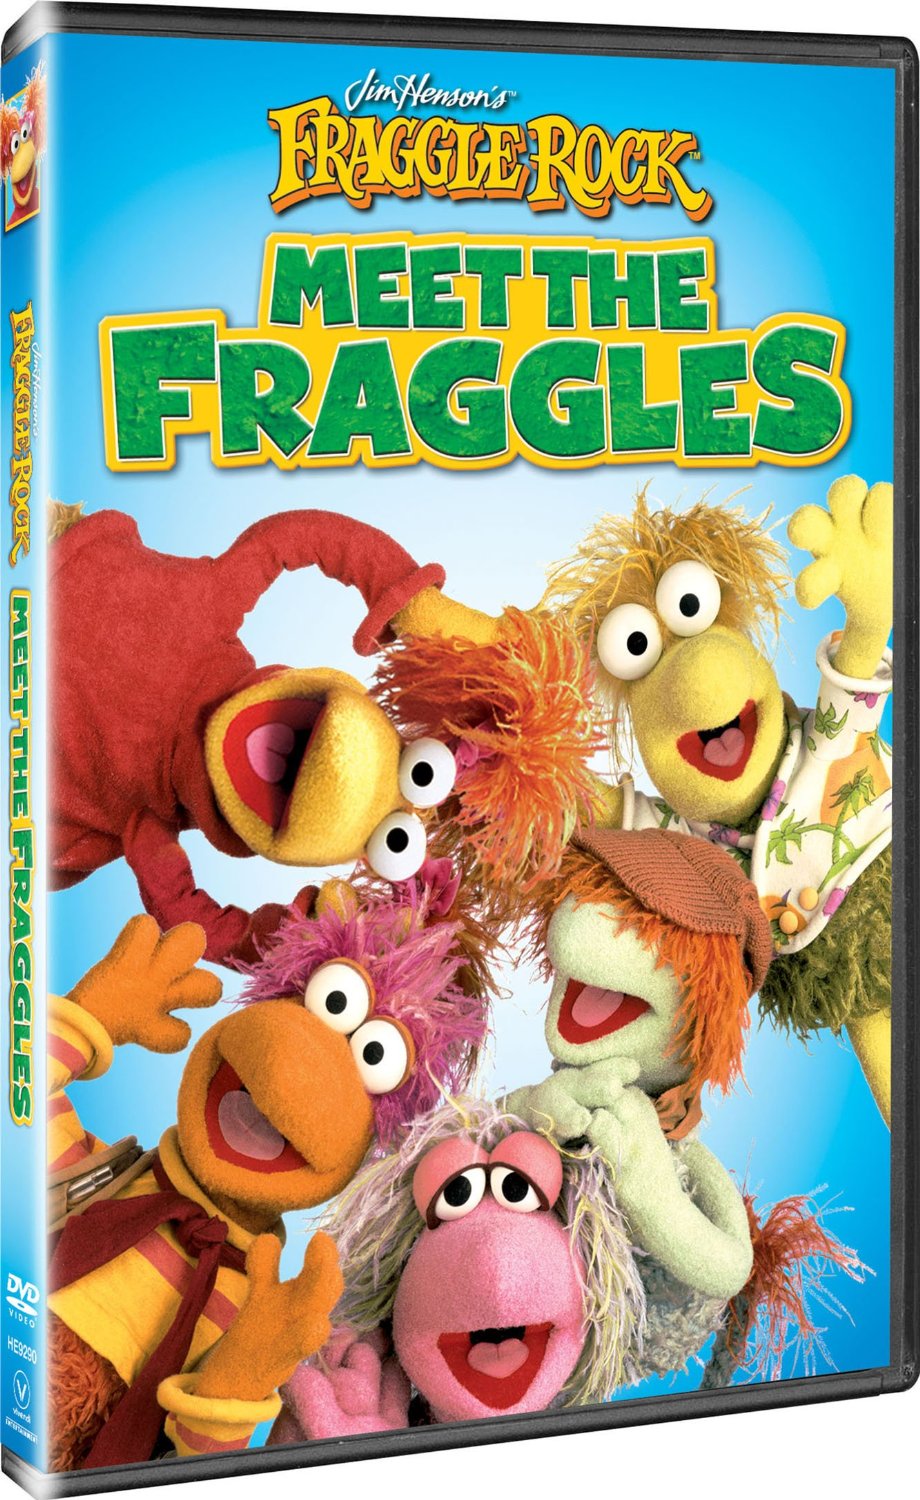 Introduce your Kids to the Fraggles with Fraggle Rock: Meet the Fraggles DVD